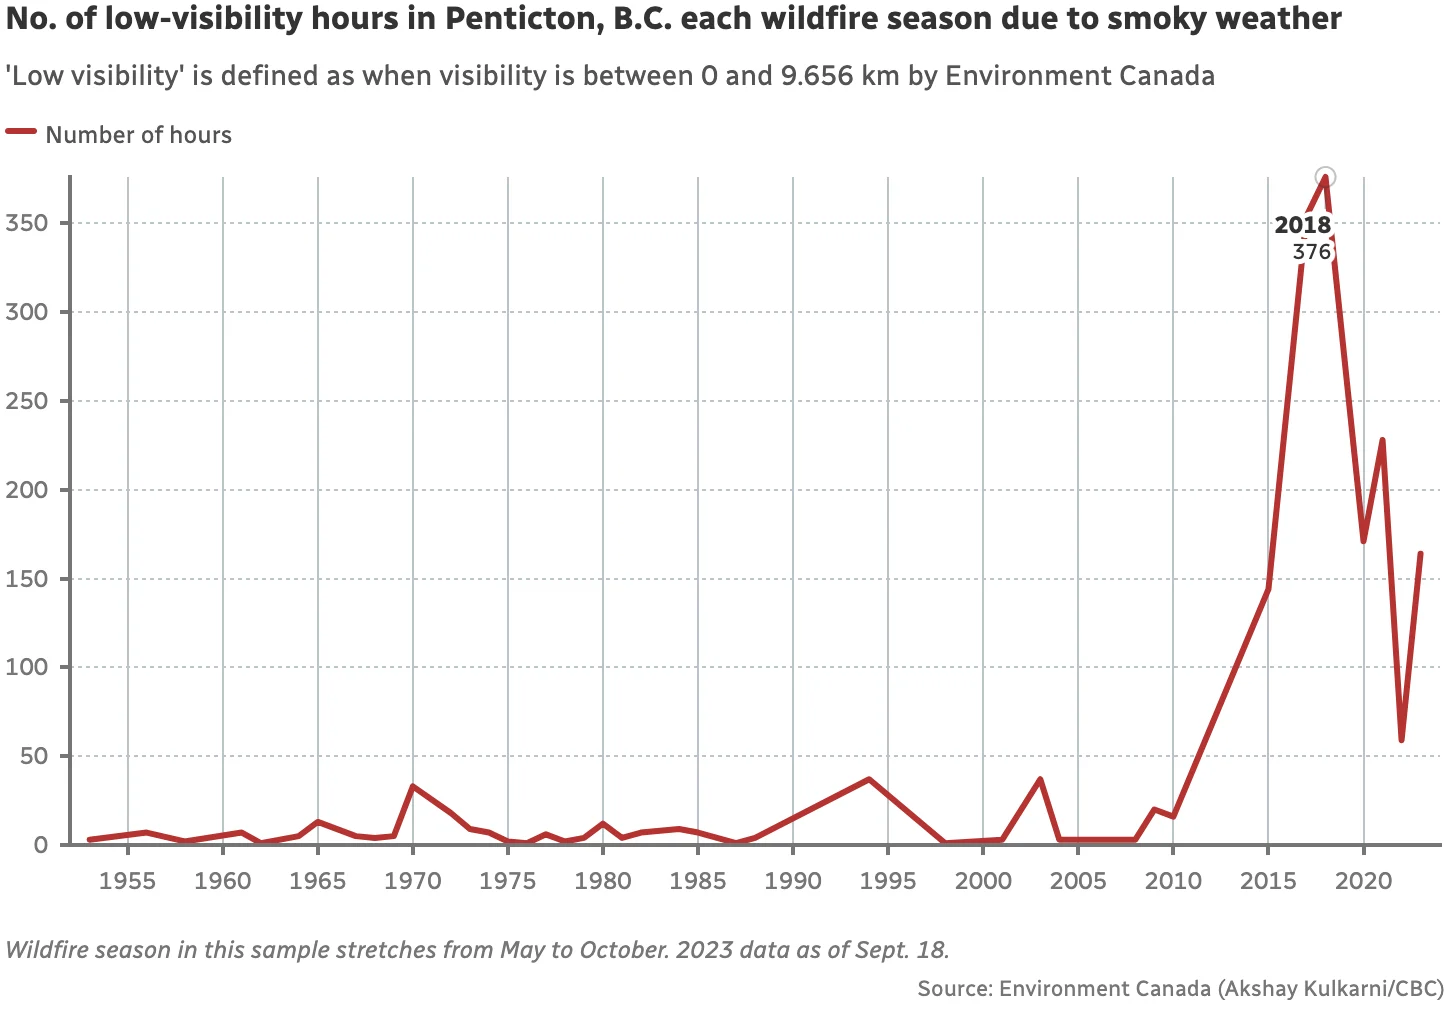 CBC: No. of low-visibility hours in Penticton, B.C. each wildfire season due to smoky weather